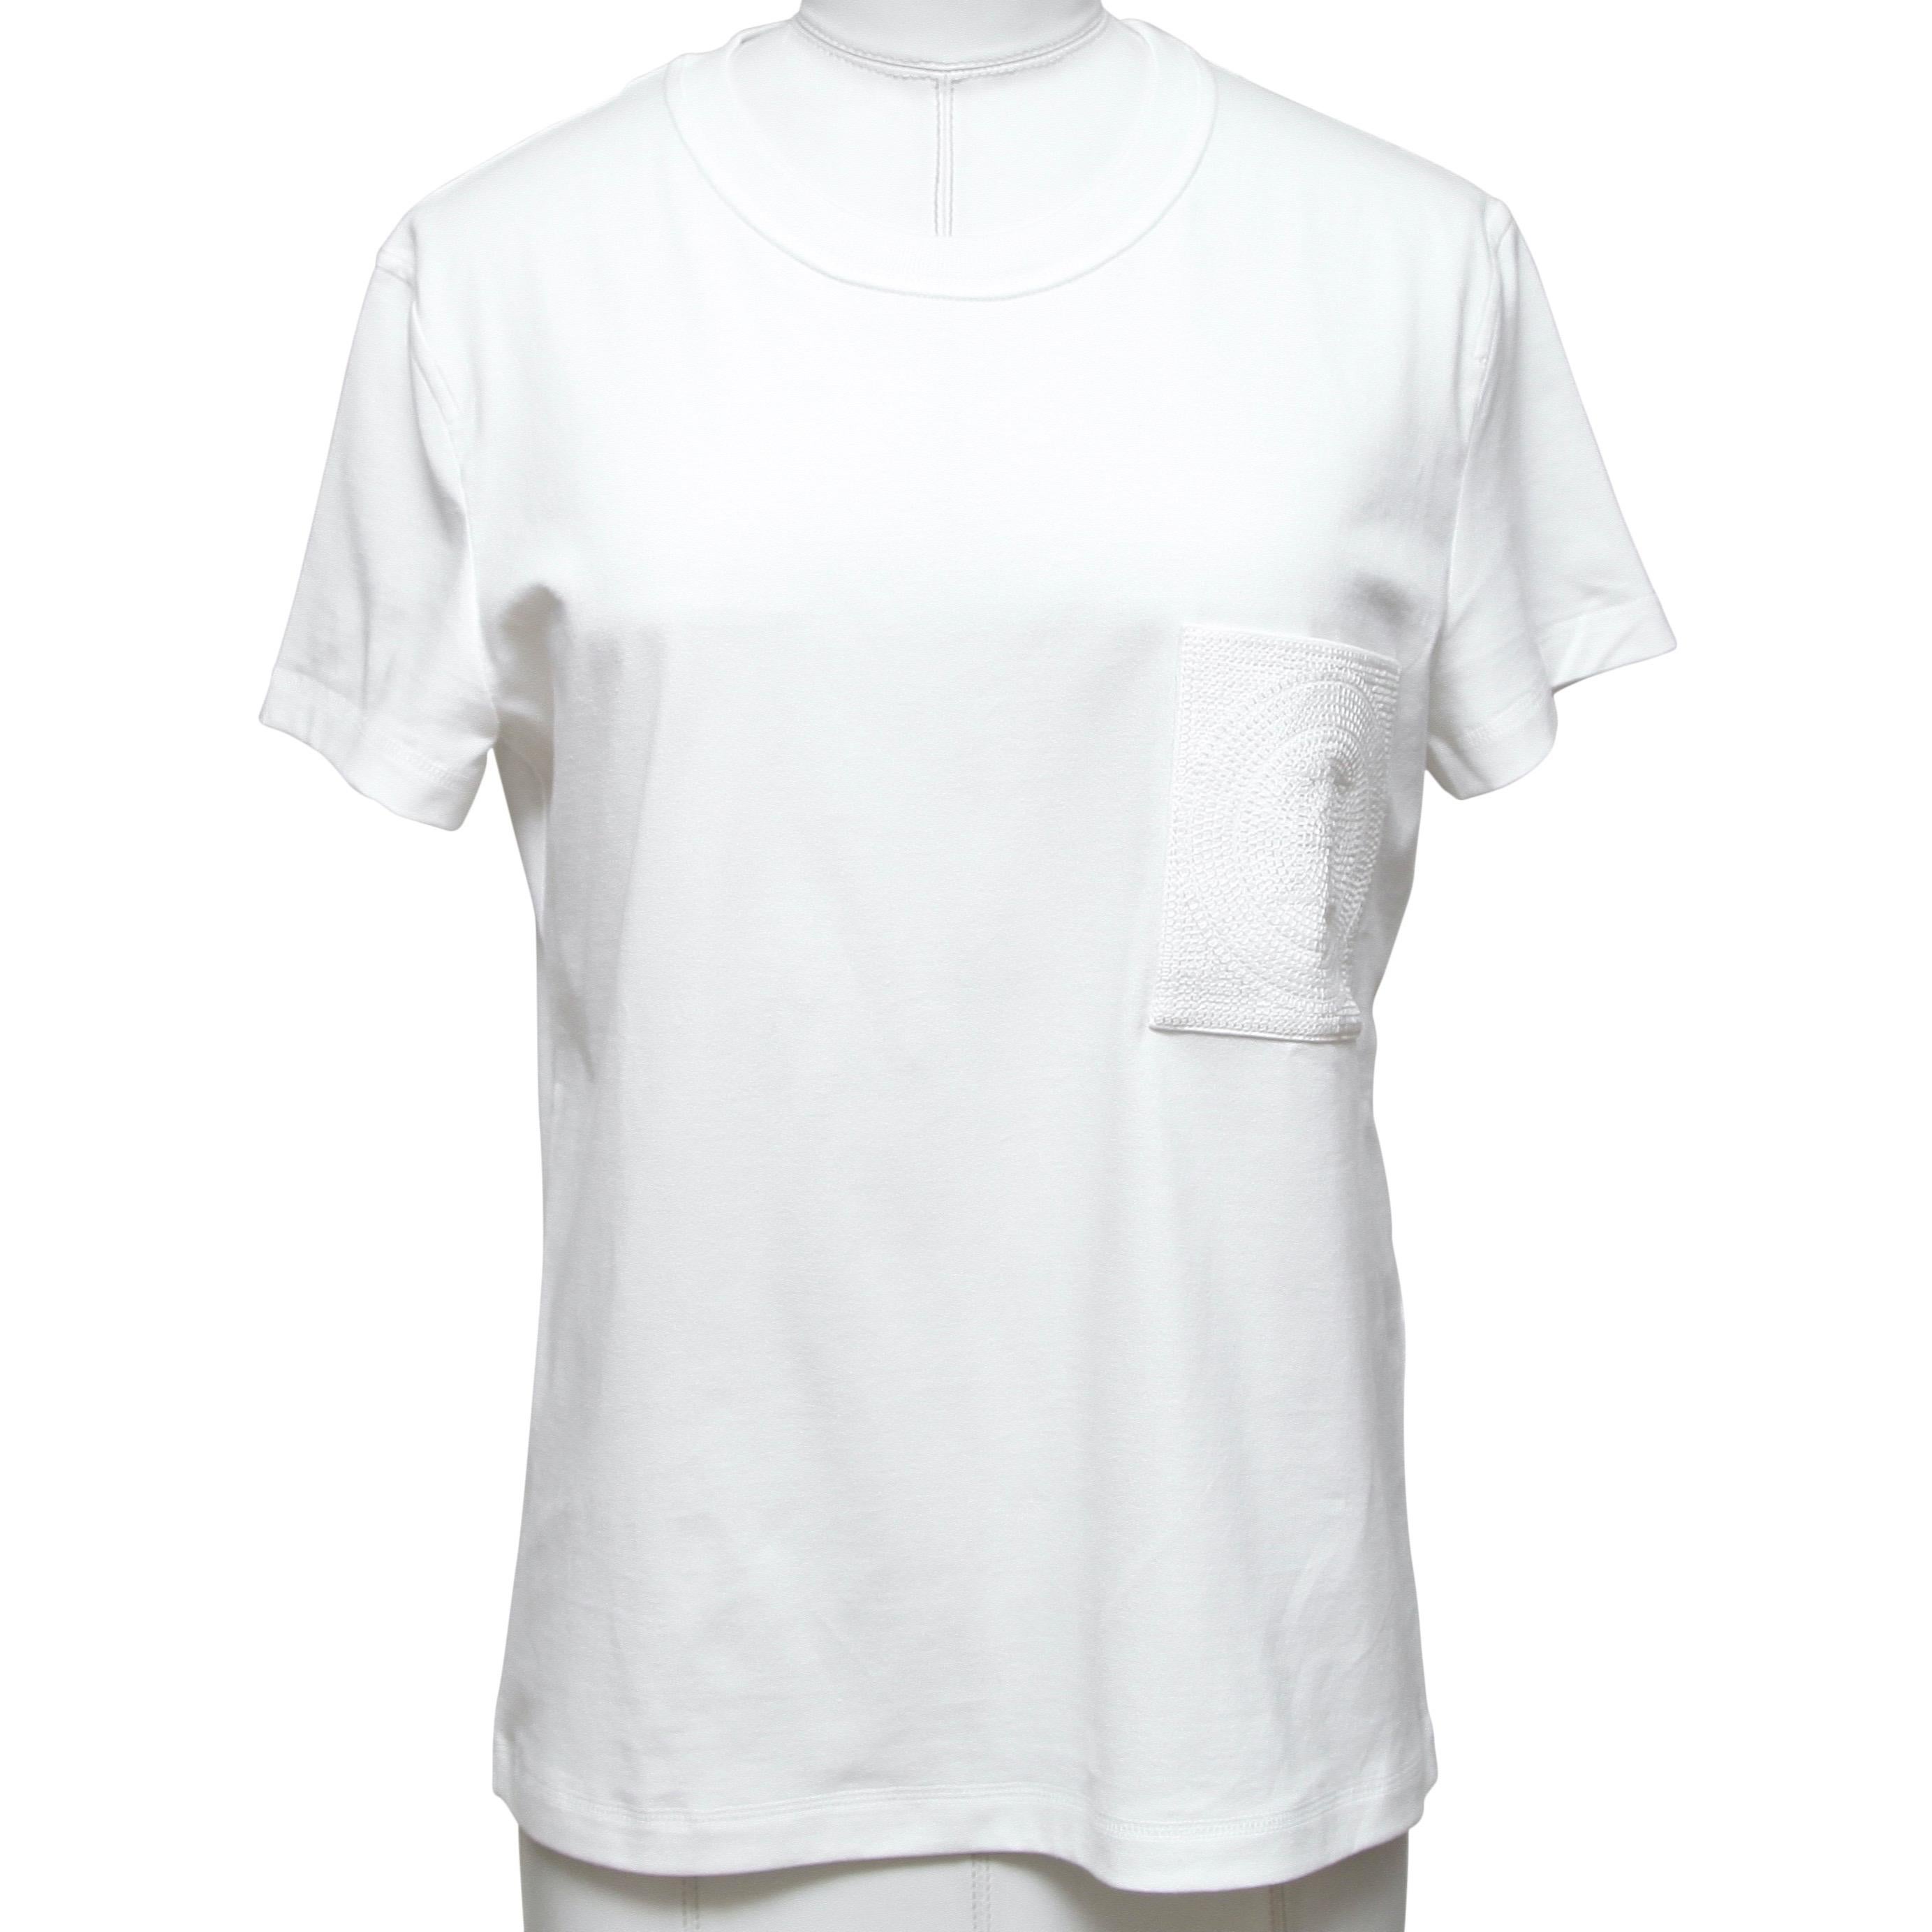 GUARANTEED AUTHENTIC HERMES MOSAIQUE EMBROIDERY WHITE T SHIRT

Design:
- White mosaique embroidery pocket against a white color.
- Crew neck.
- Short sleeve.
- Slip on.

Size: 36

Material: 100% Cotton

Measurements (Approximate laid flat):
-